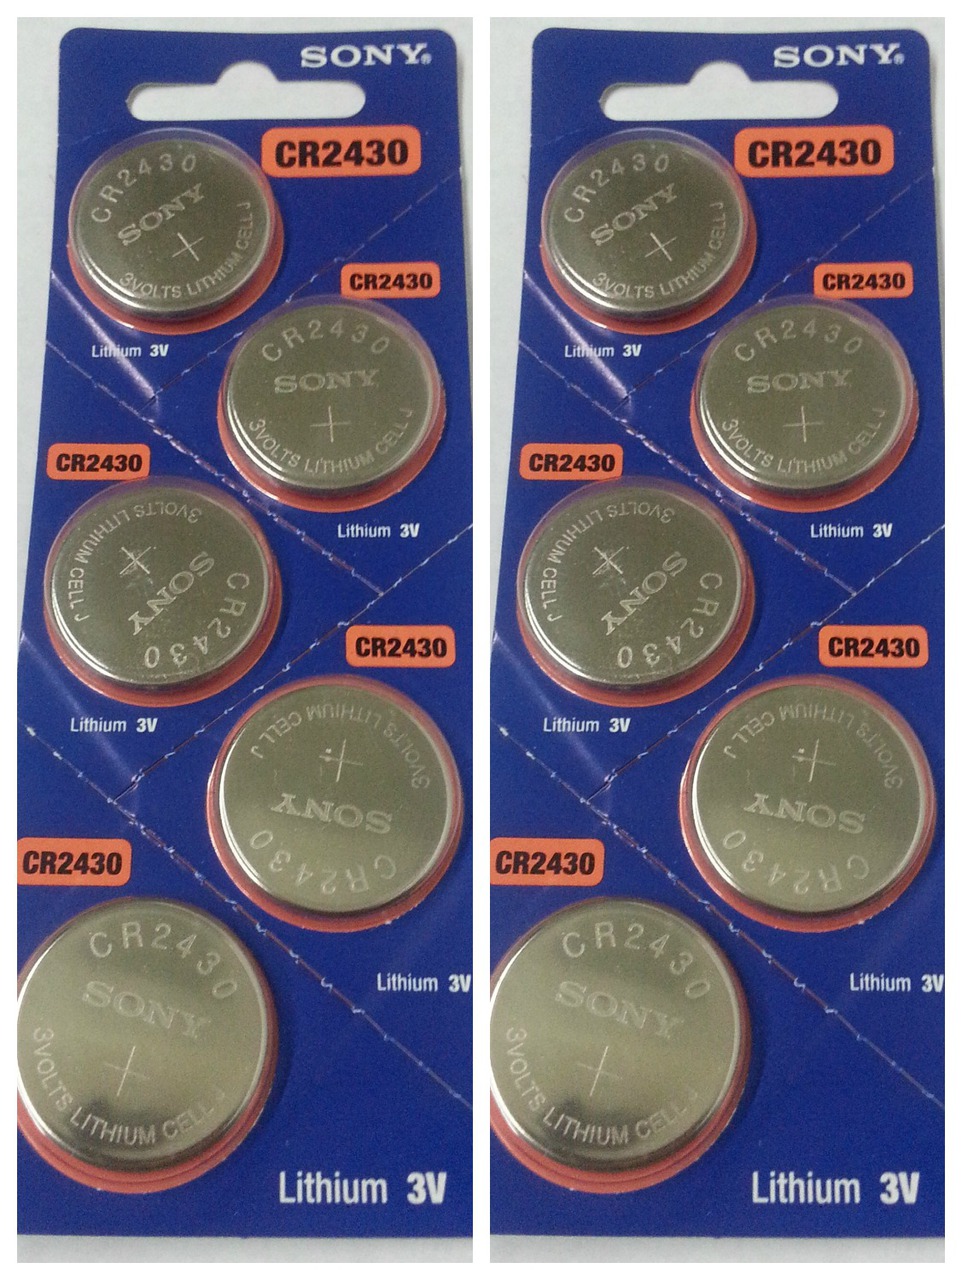 Sony CR2430 3V Lithium Coin Battery - 10 Pack + FREE SHIPPING